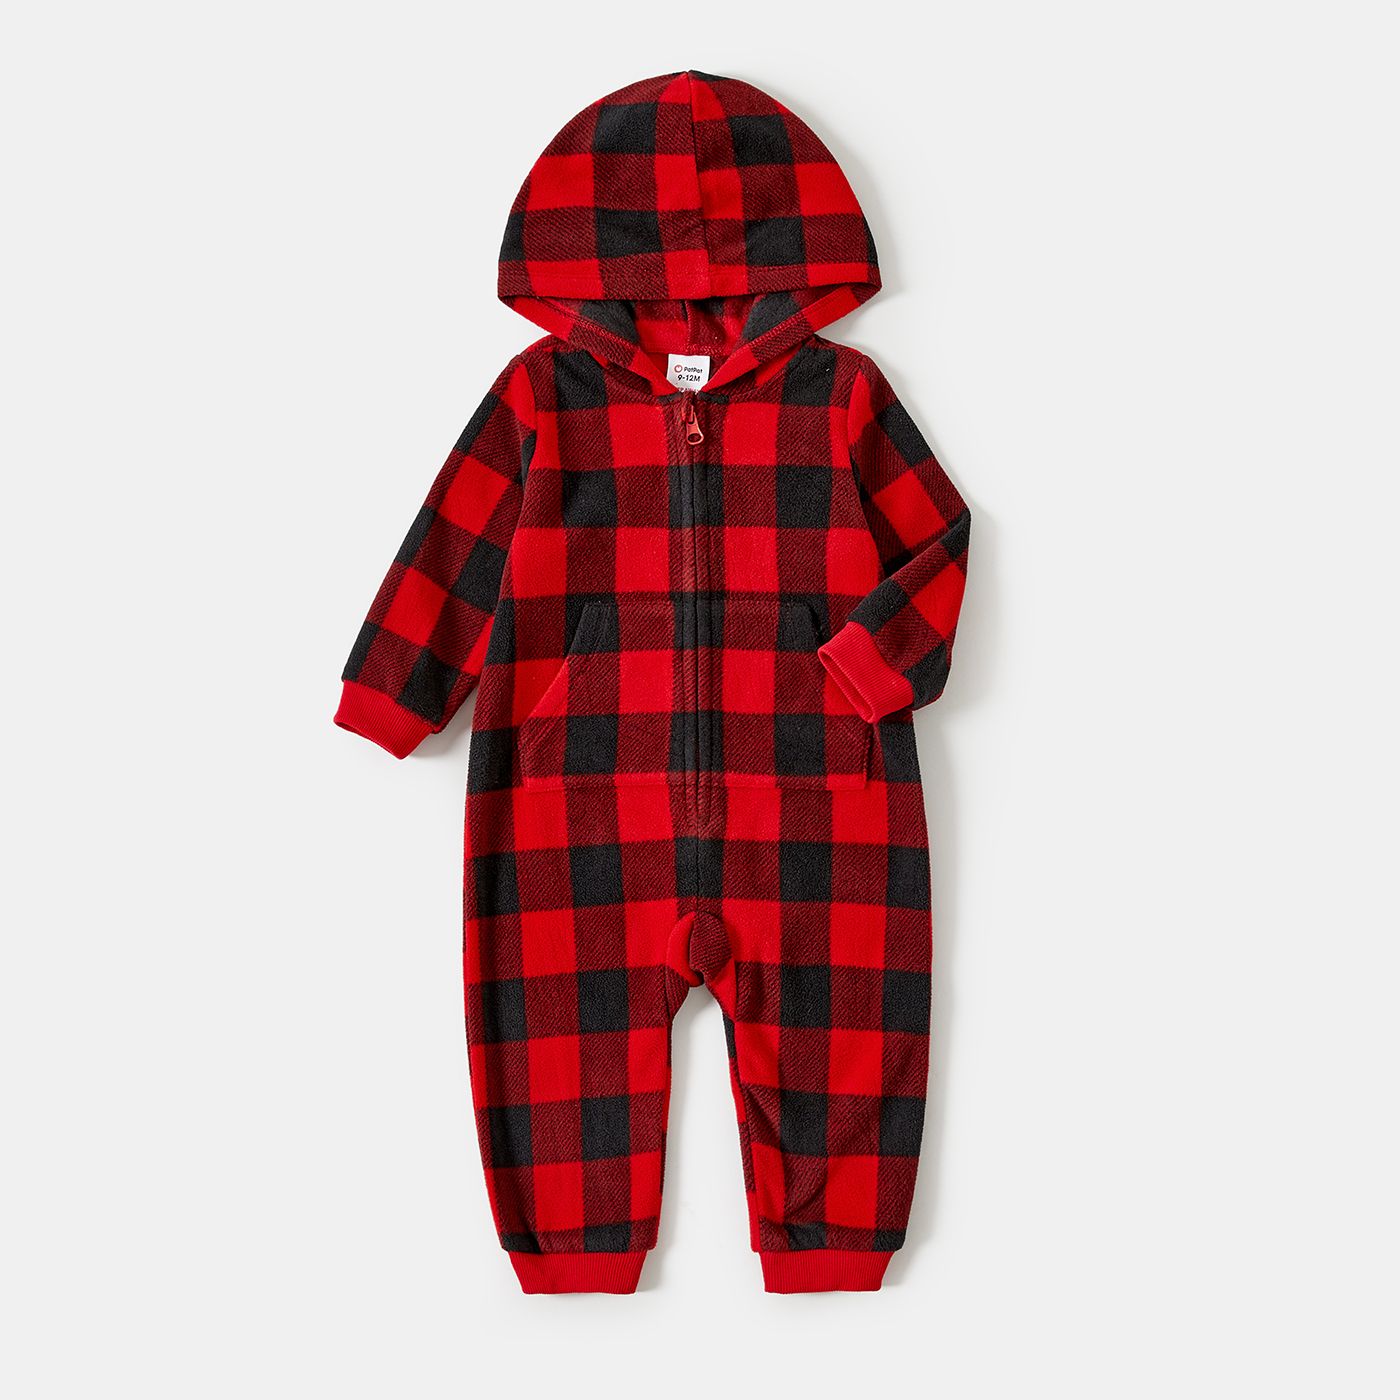 Christmas Family Matching Red And Black Plaid Hooded Drawstring Fleece Long-sleeve Coat Top